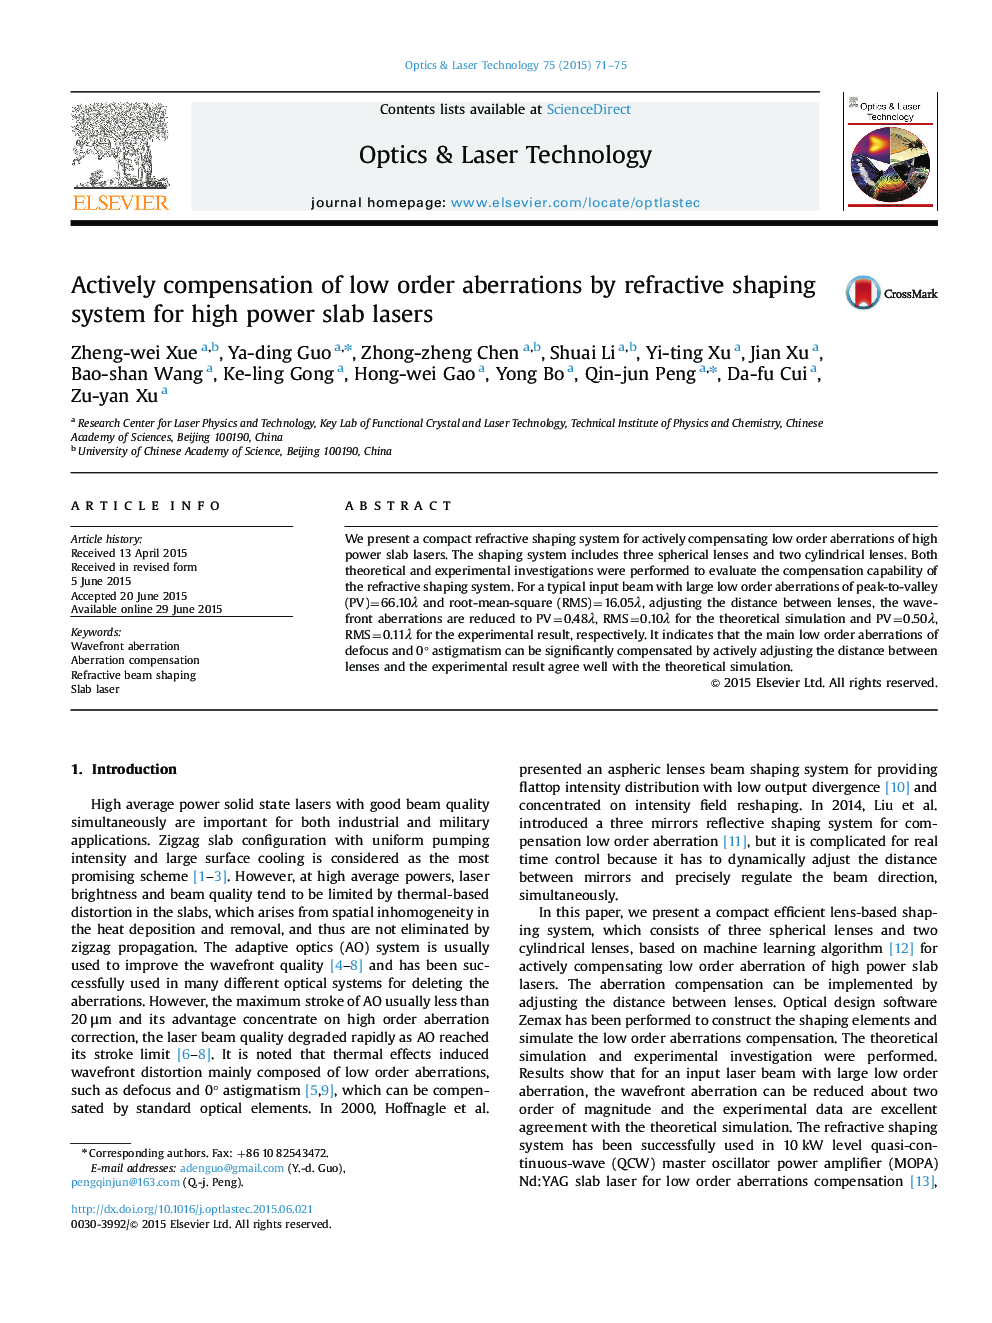 Actively compensation of low order aberrations by refractive shaping system for high power slab lasers